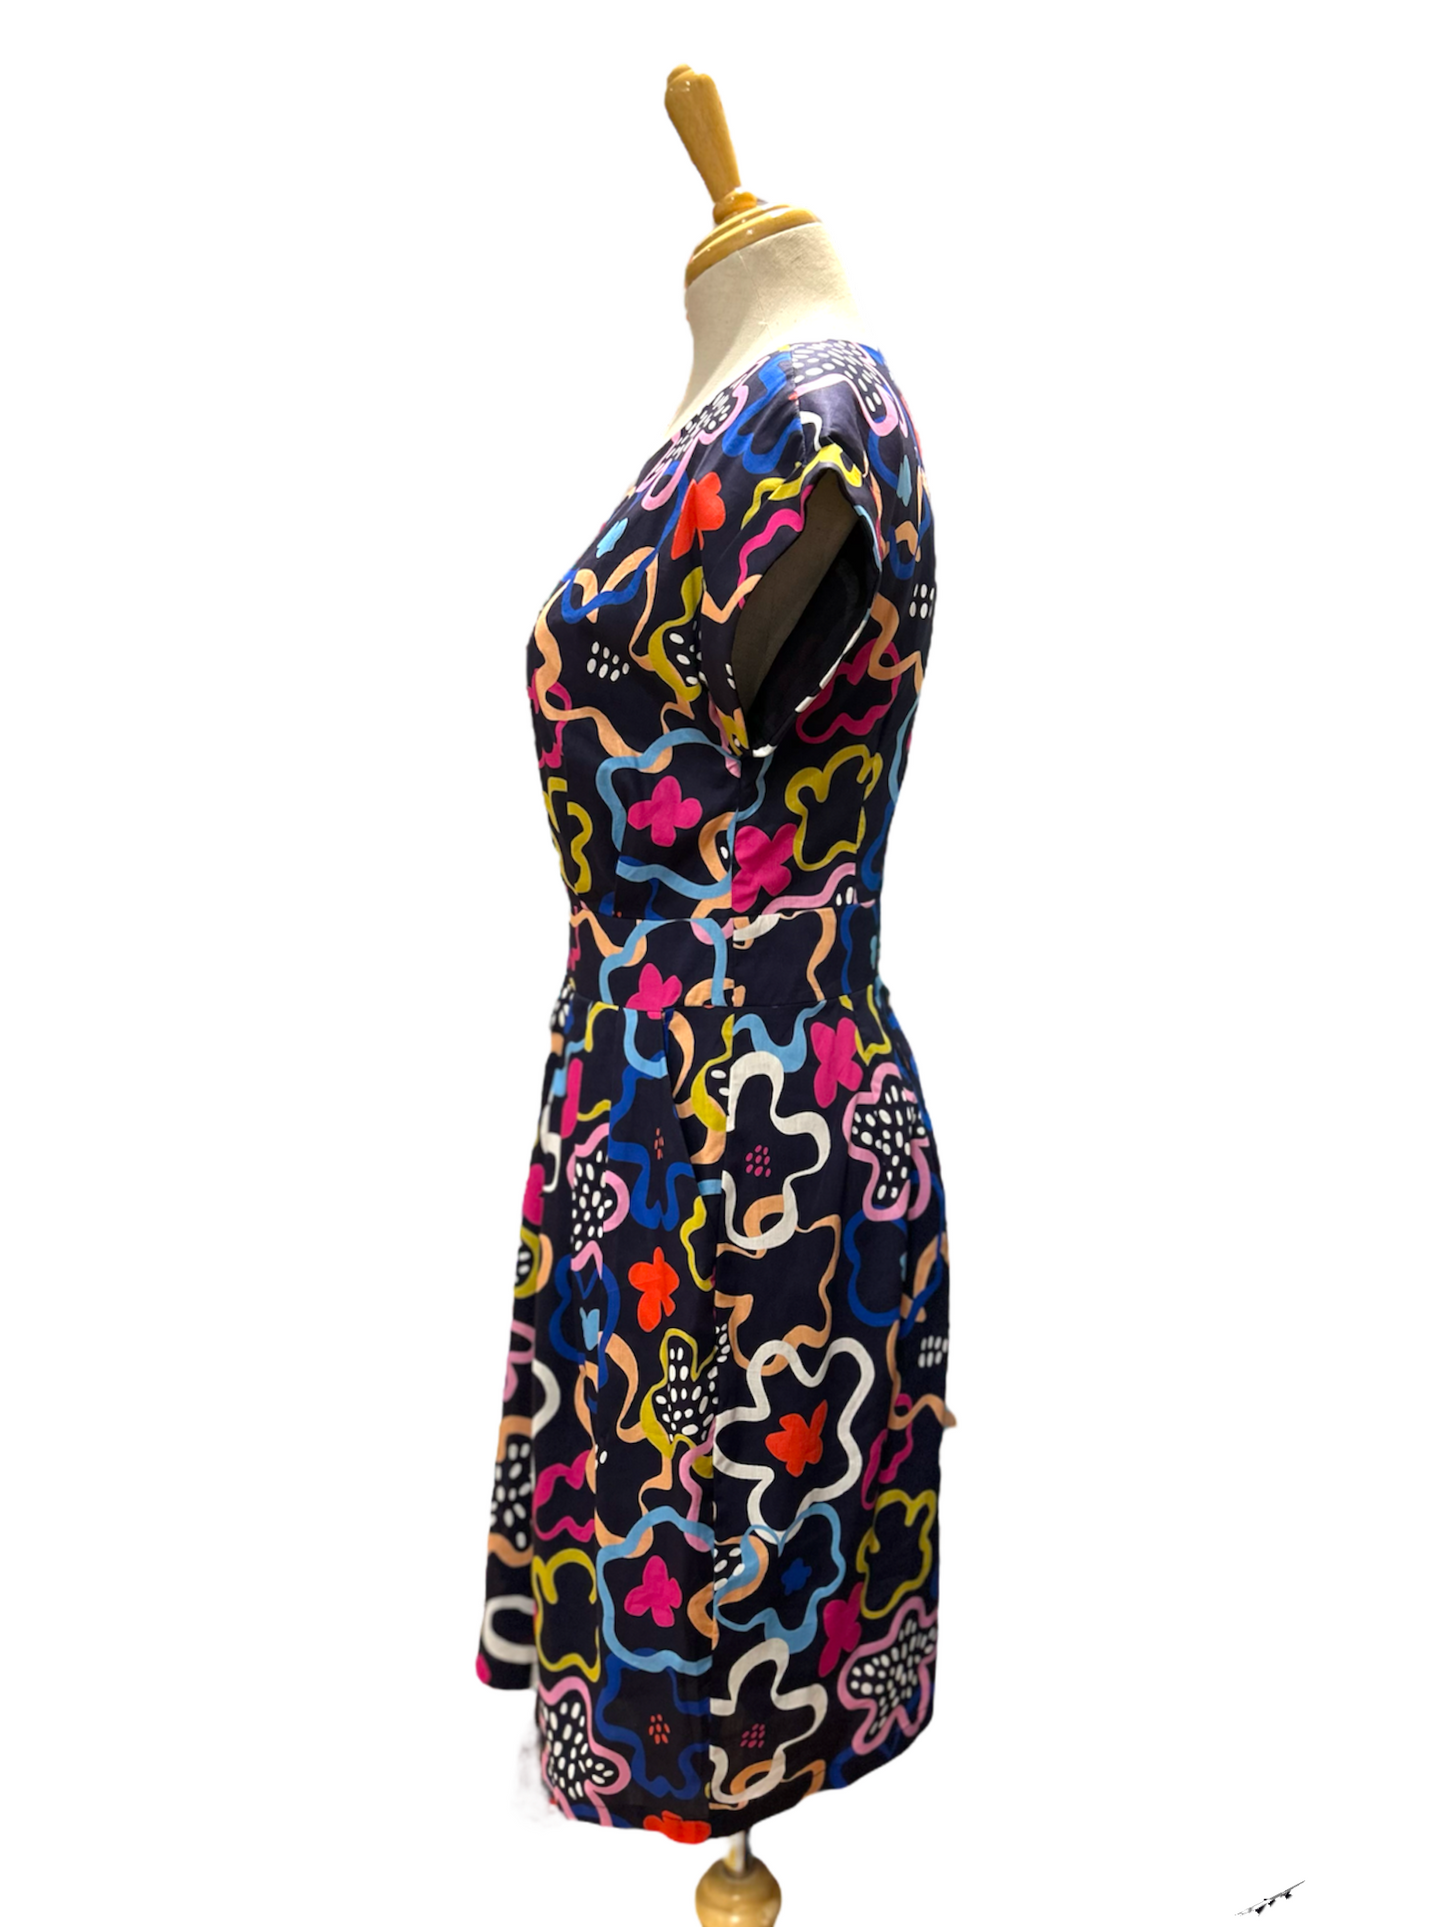 A Walk in the Park Dress - Abstract flower pattern